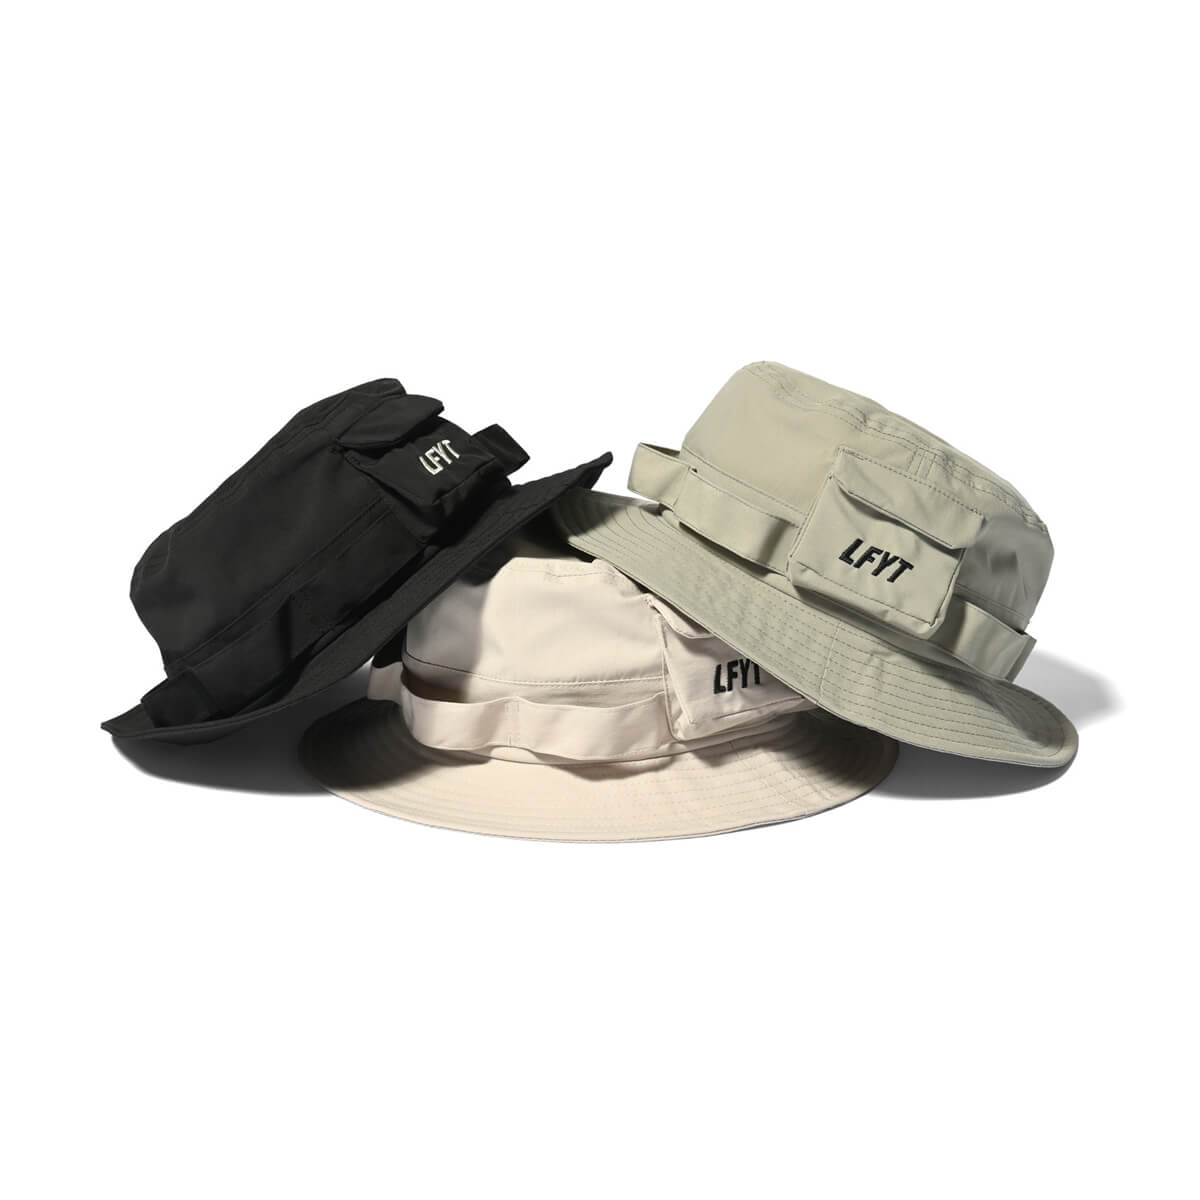 LFYT Tactical Boonie Hat